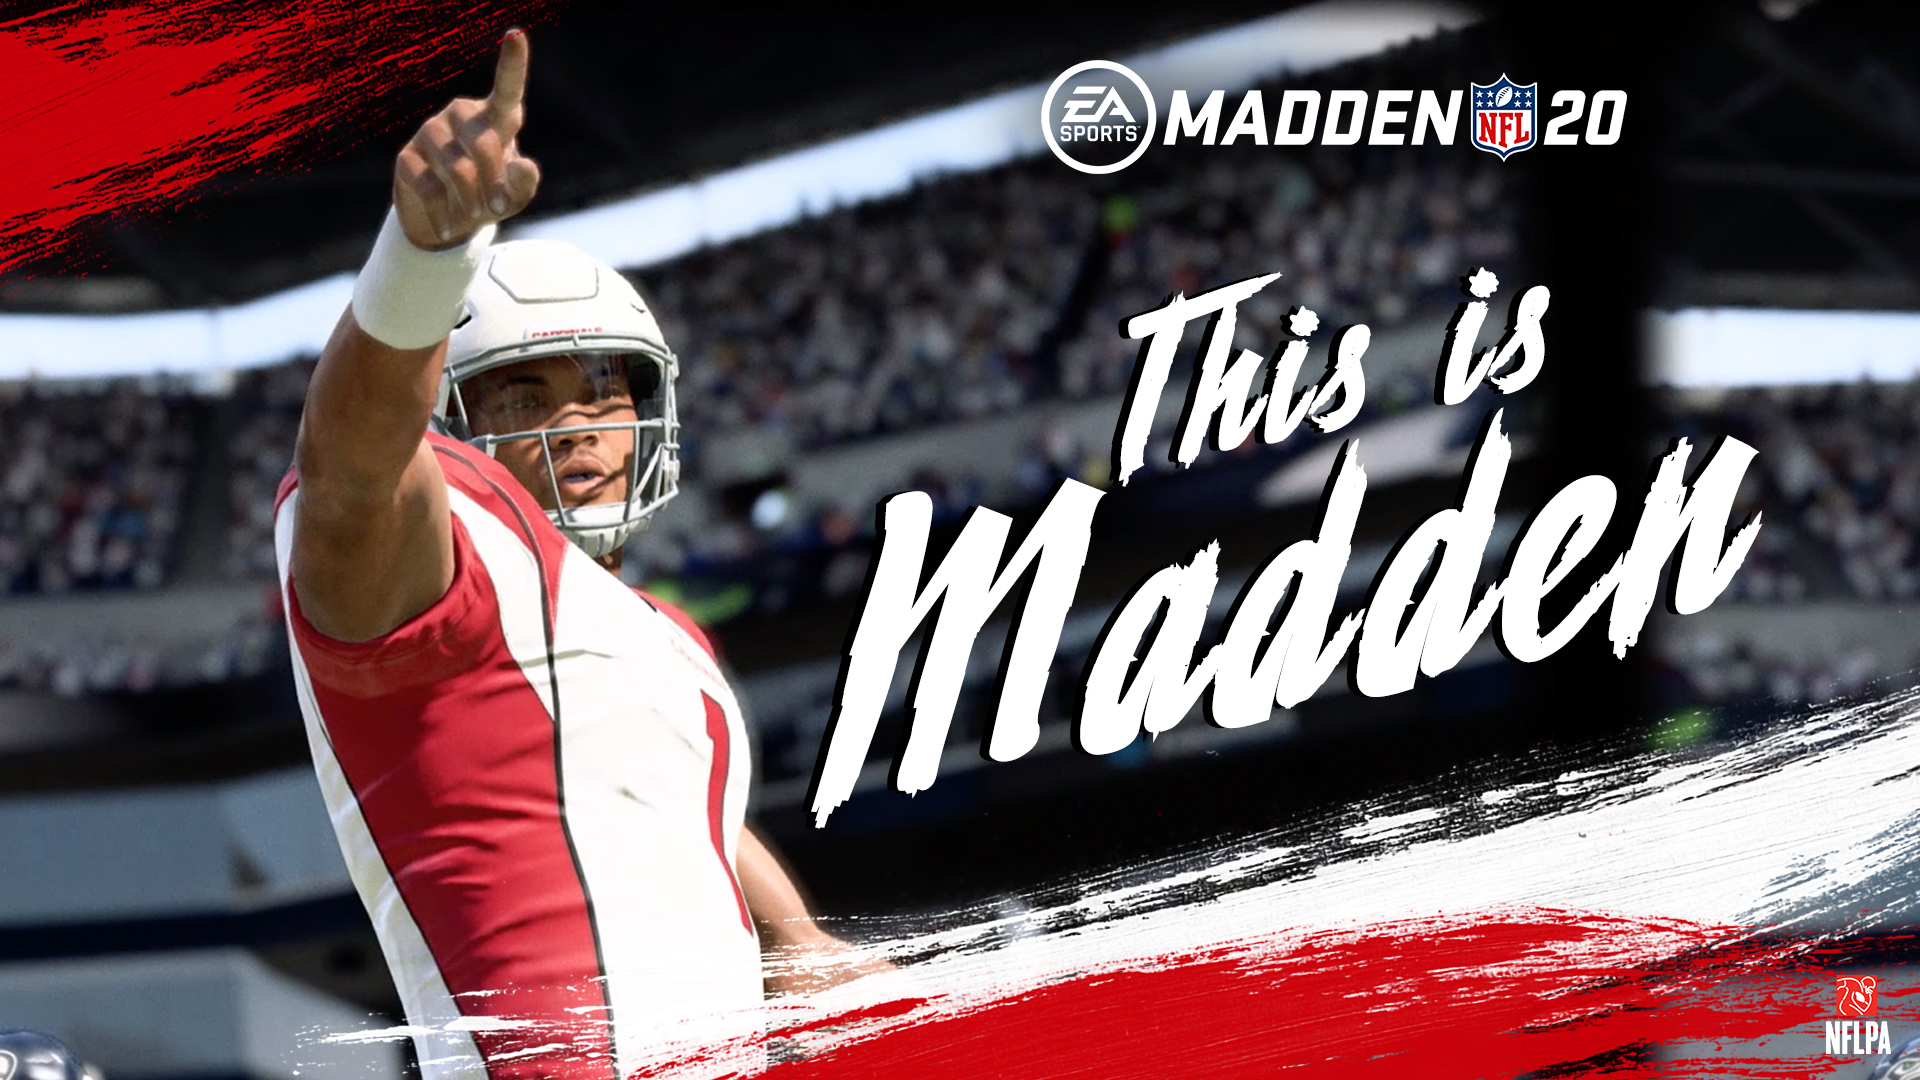 Madden Nfl 20 For Xbox One Xbox